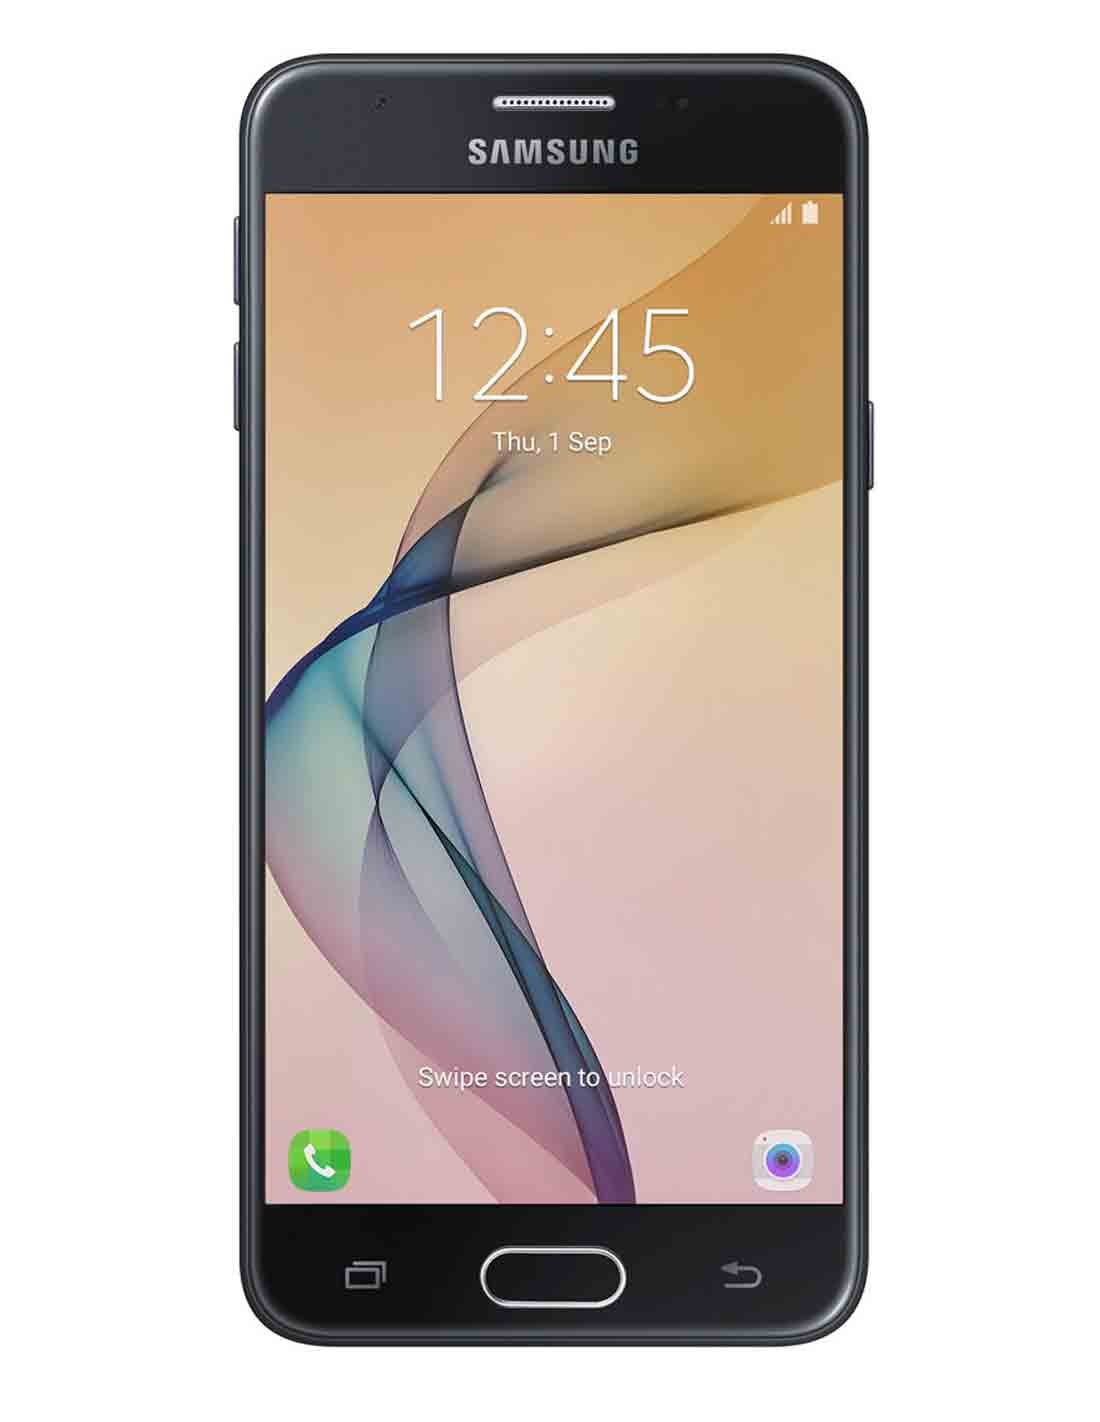 Samsung Galaxy J5 Prime at a Cheap Price and Free Delivery in Dubai Online Store